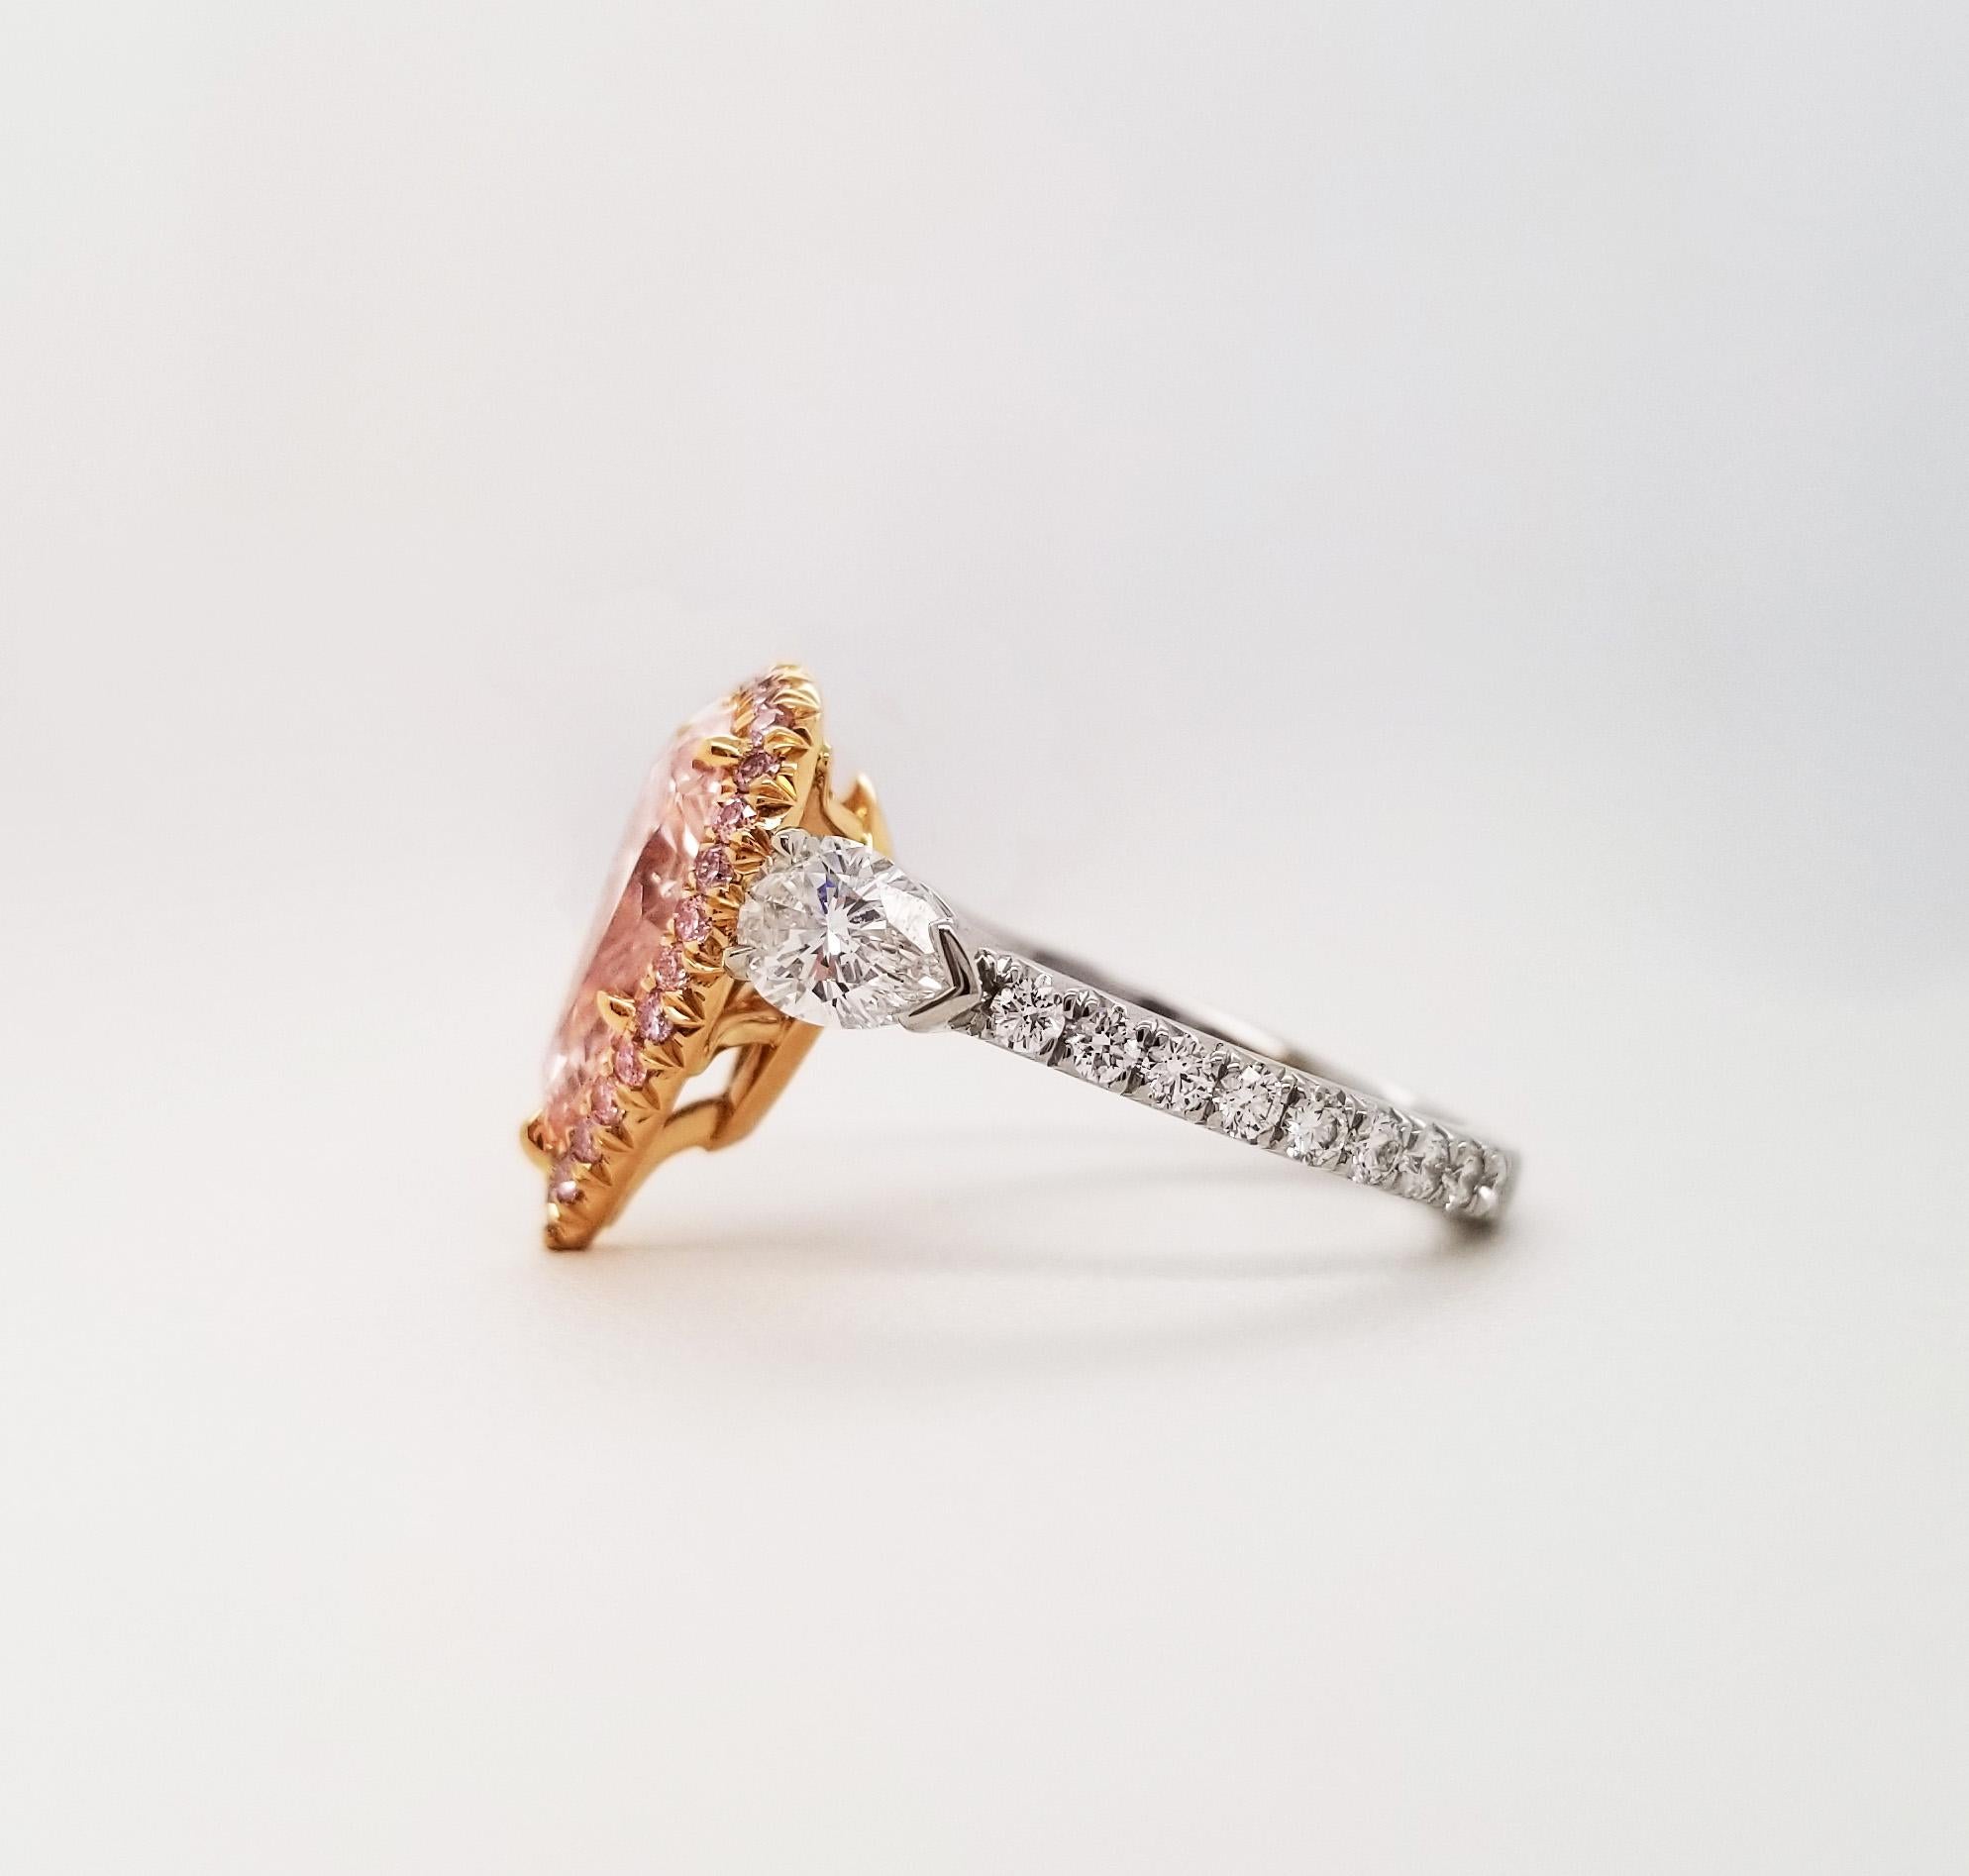 Pear Cut Scarselli 2 Carat Pear Shape Pink Diamond Ring in Platinum and 18k Goldralds For Sale